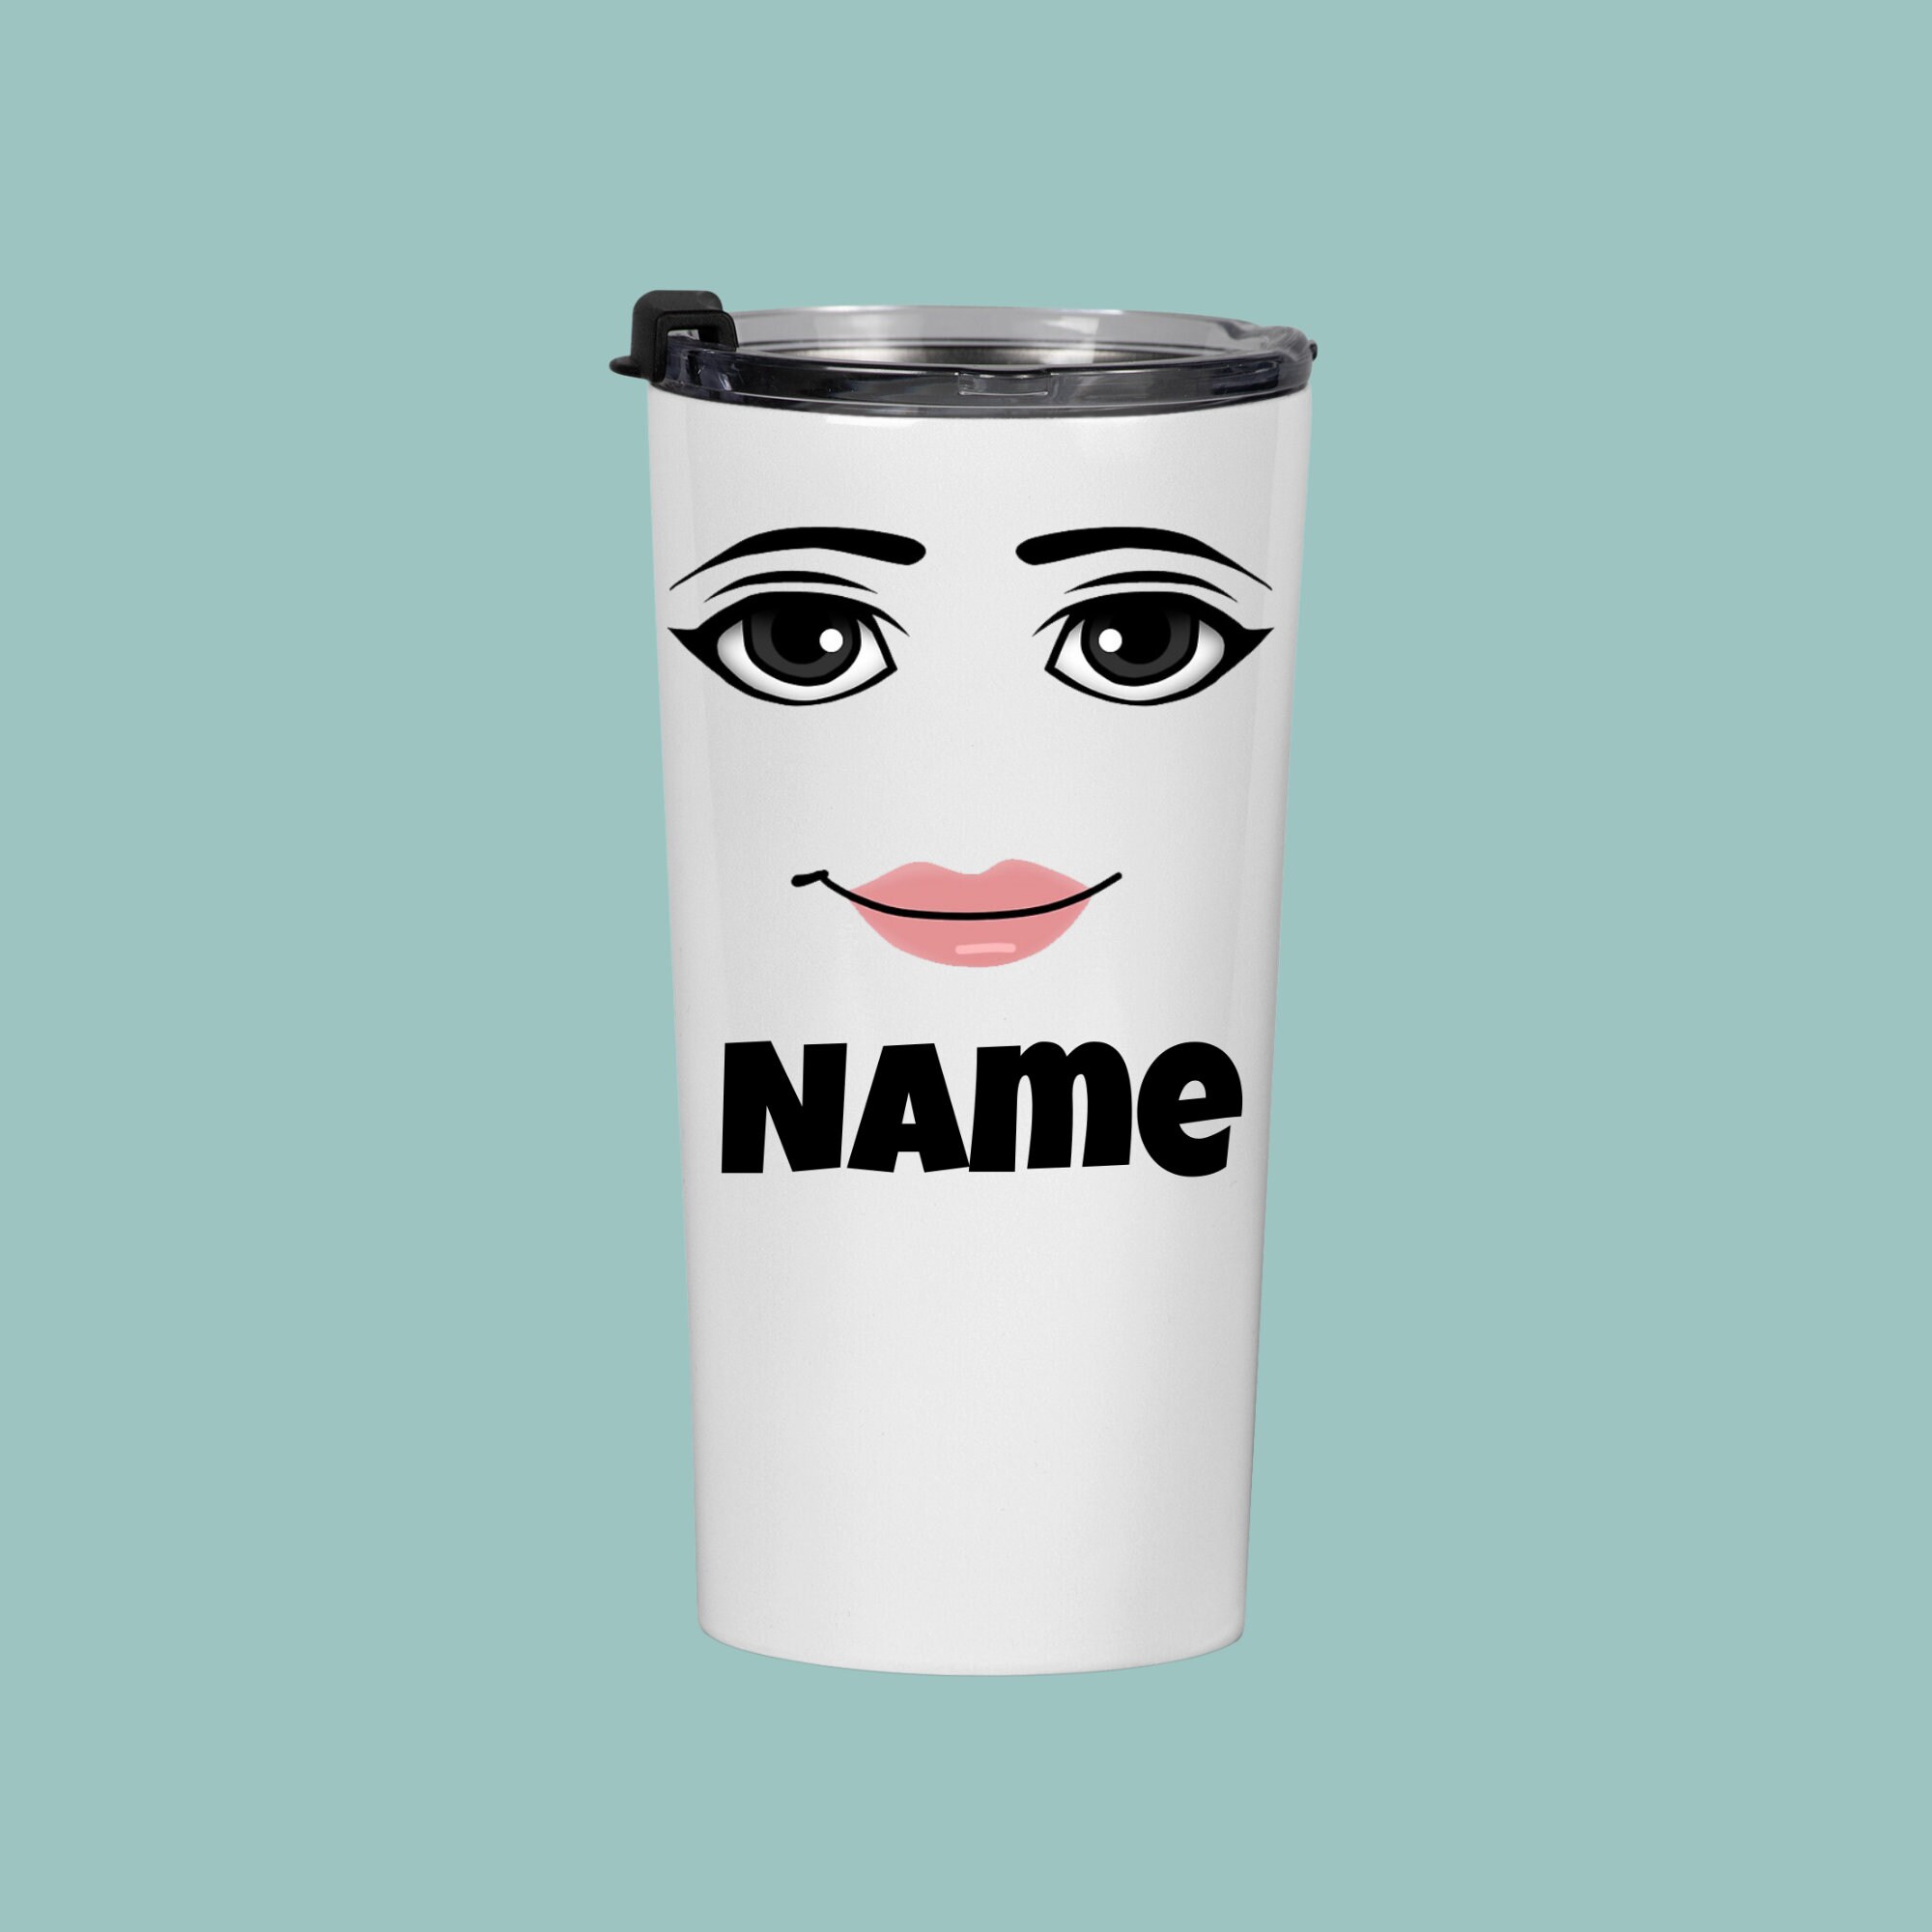 Roblox Man Face Roblox Gifts for Gamer Merch Stainless Steel Water Bottle  Roblox Water Bottle 